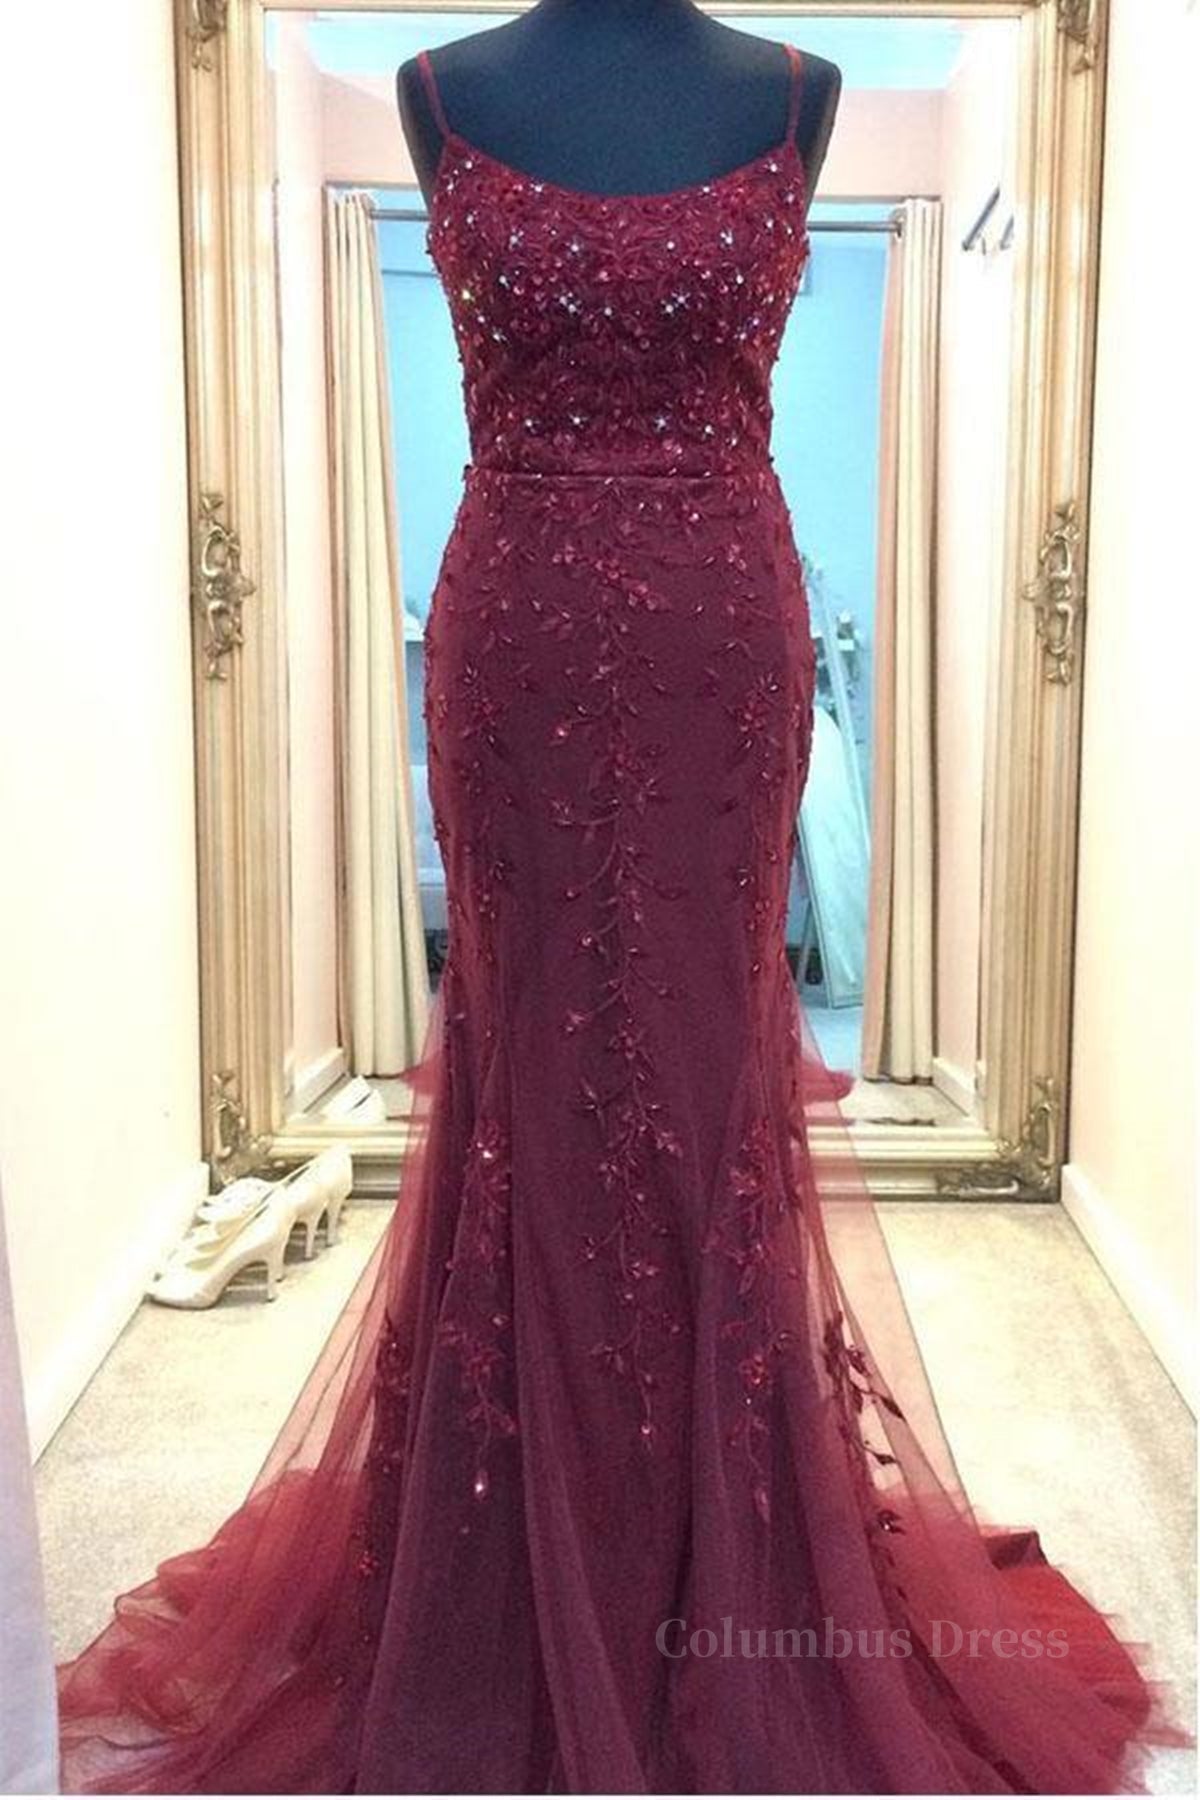 Formal Dresses For Winter, Backless Mermaid Beaded Maroon Lace Long Prom Dresses, Backless Burgundy Lace Formal Dresses, Burgundy Tulle Evening Dresses